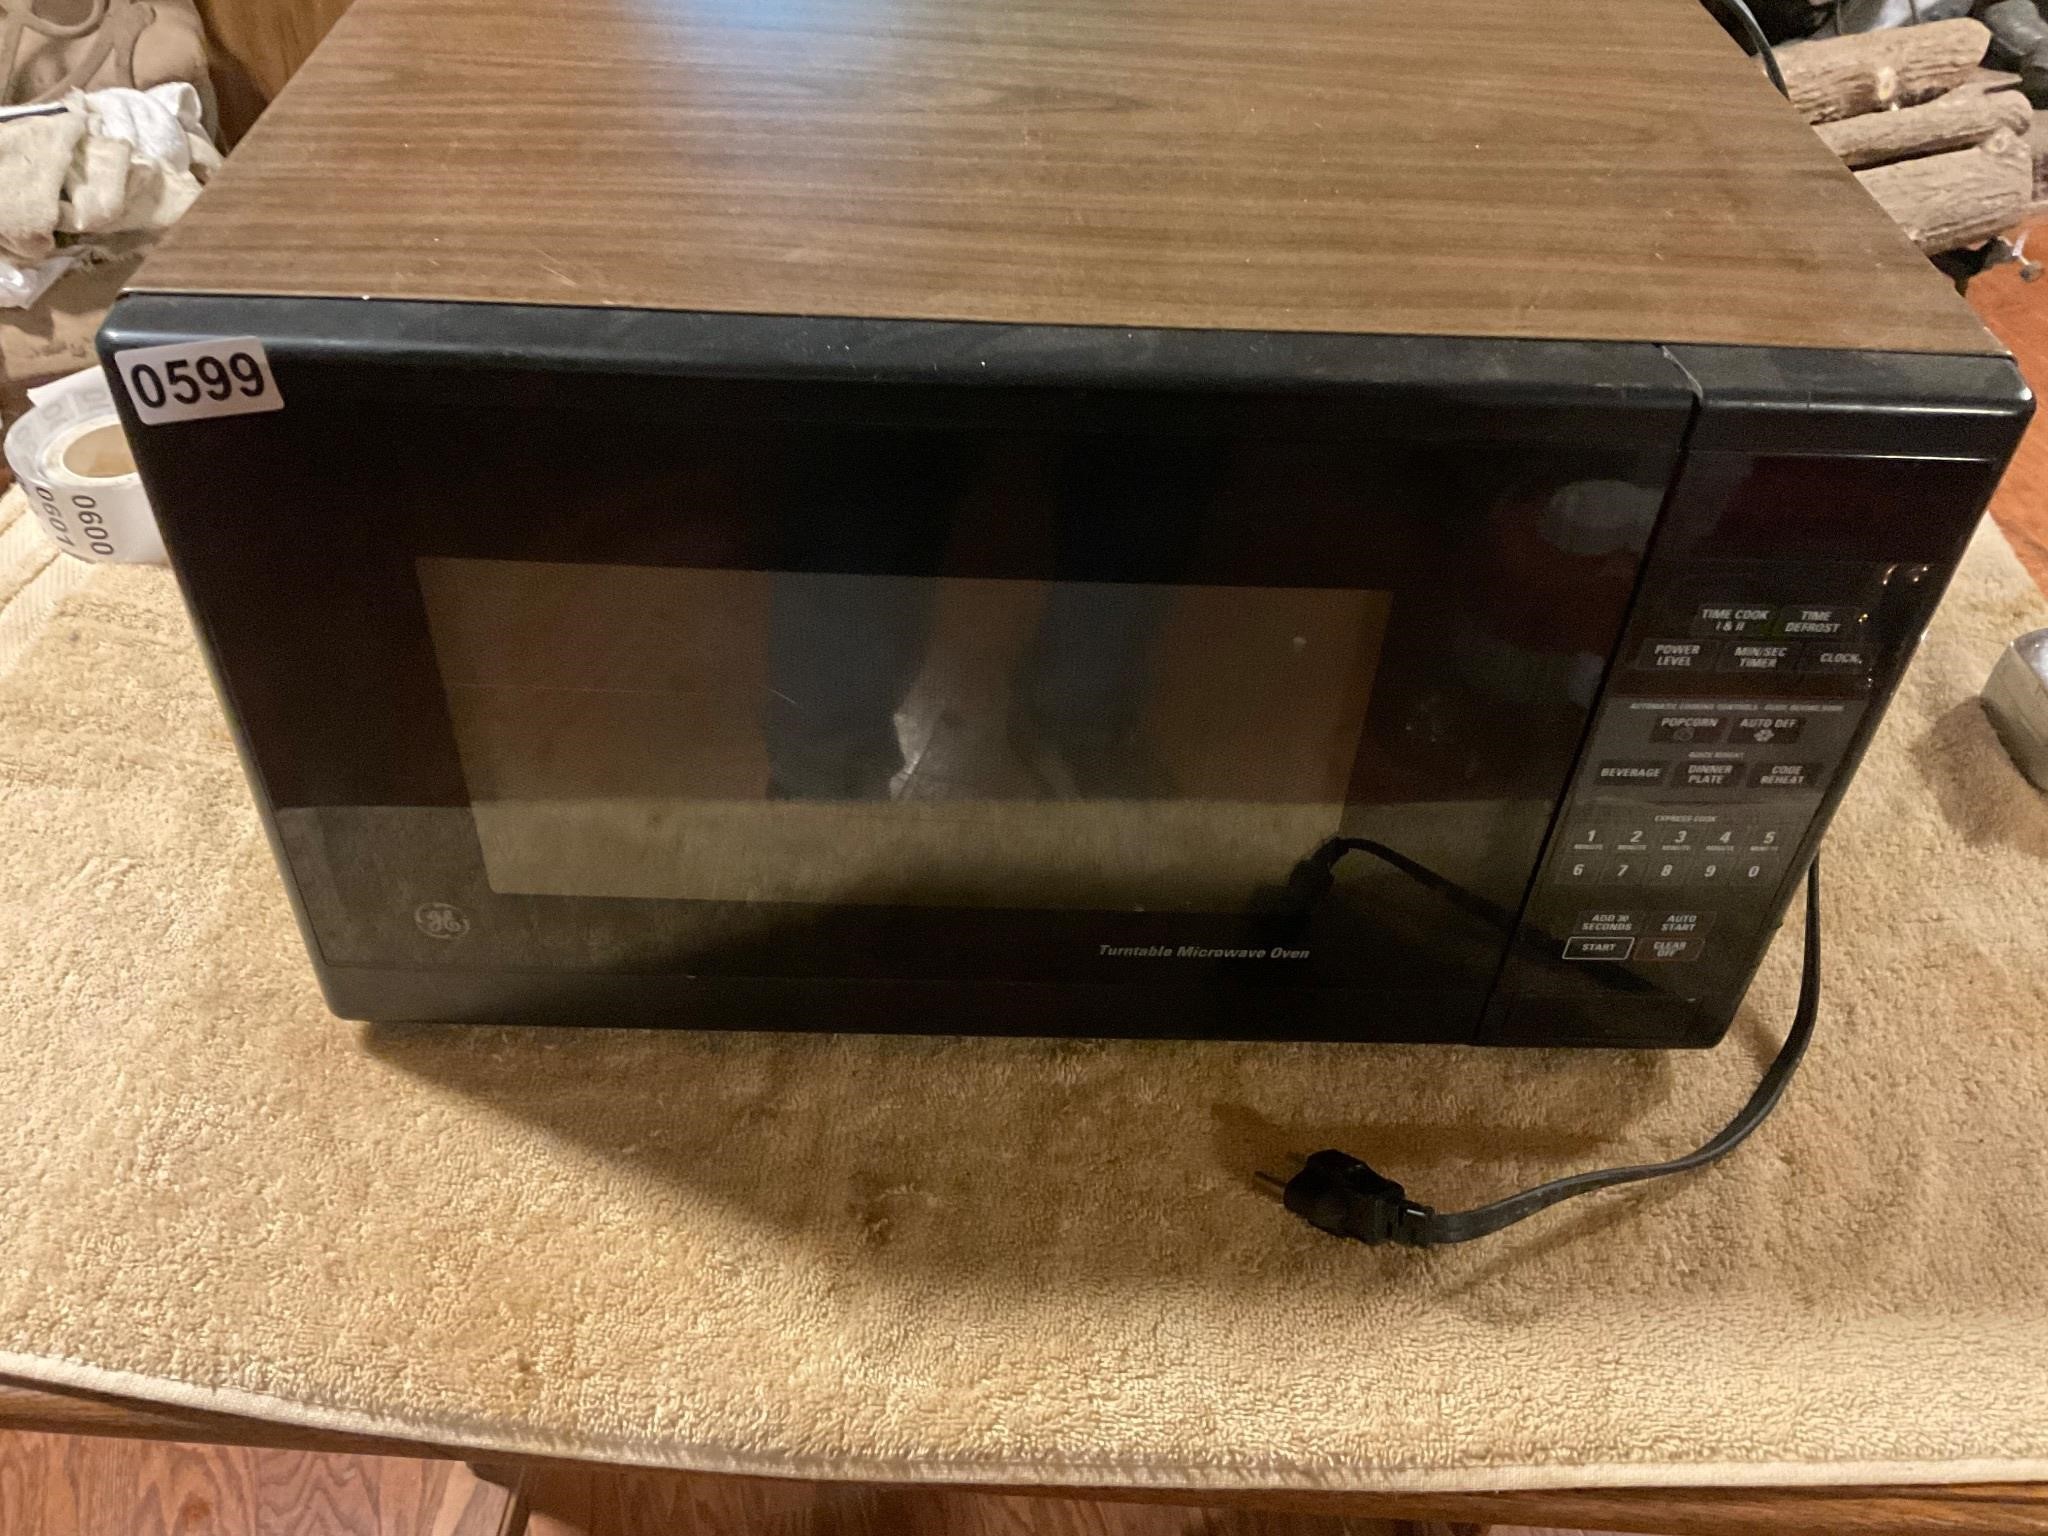 GE Microwave- Clean and working